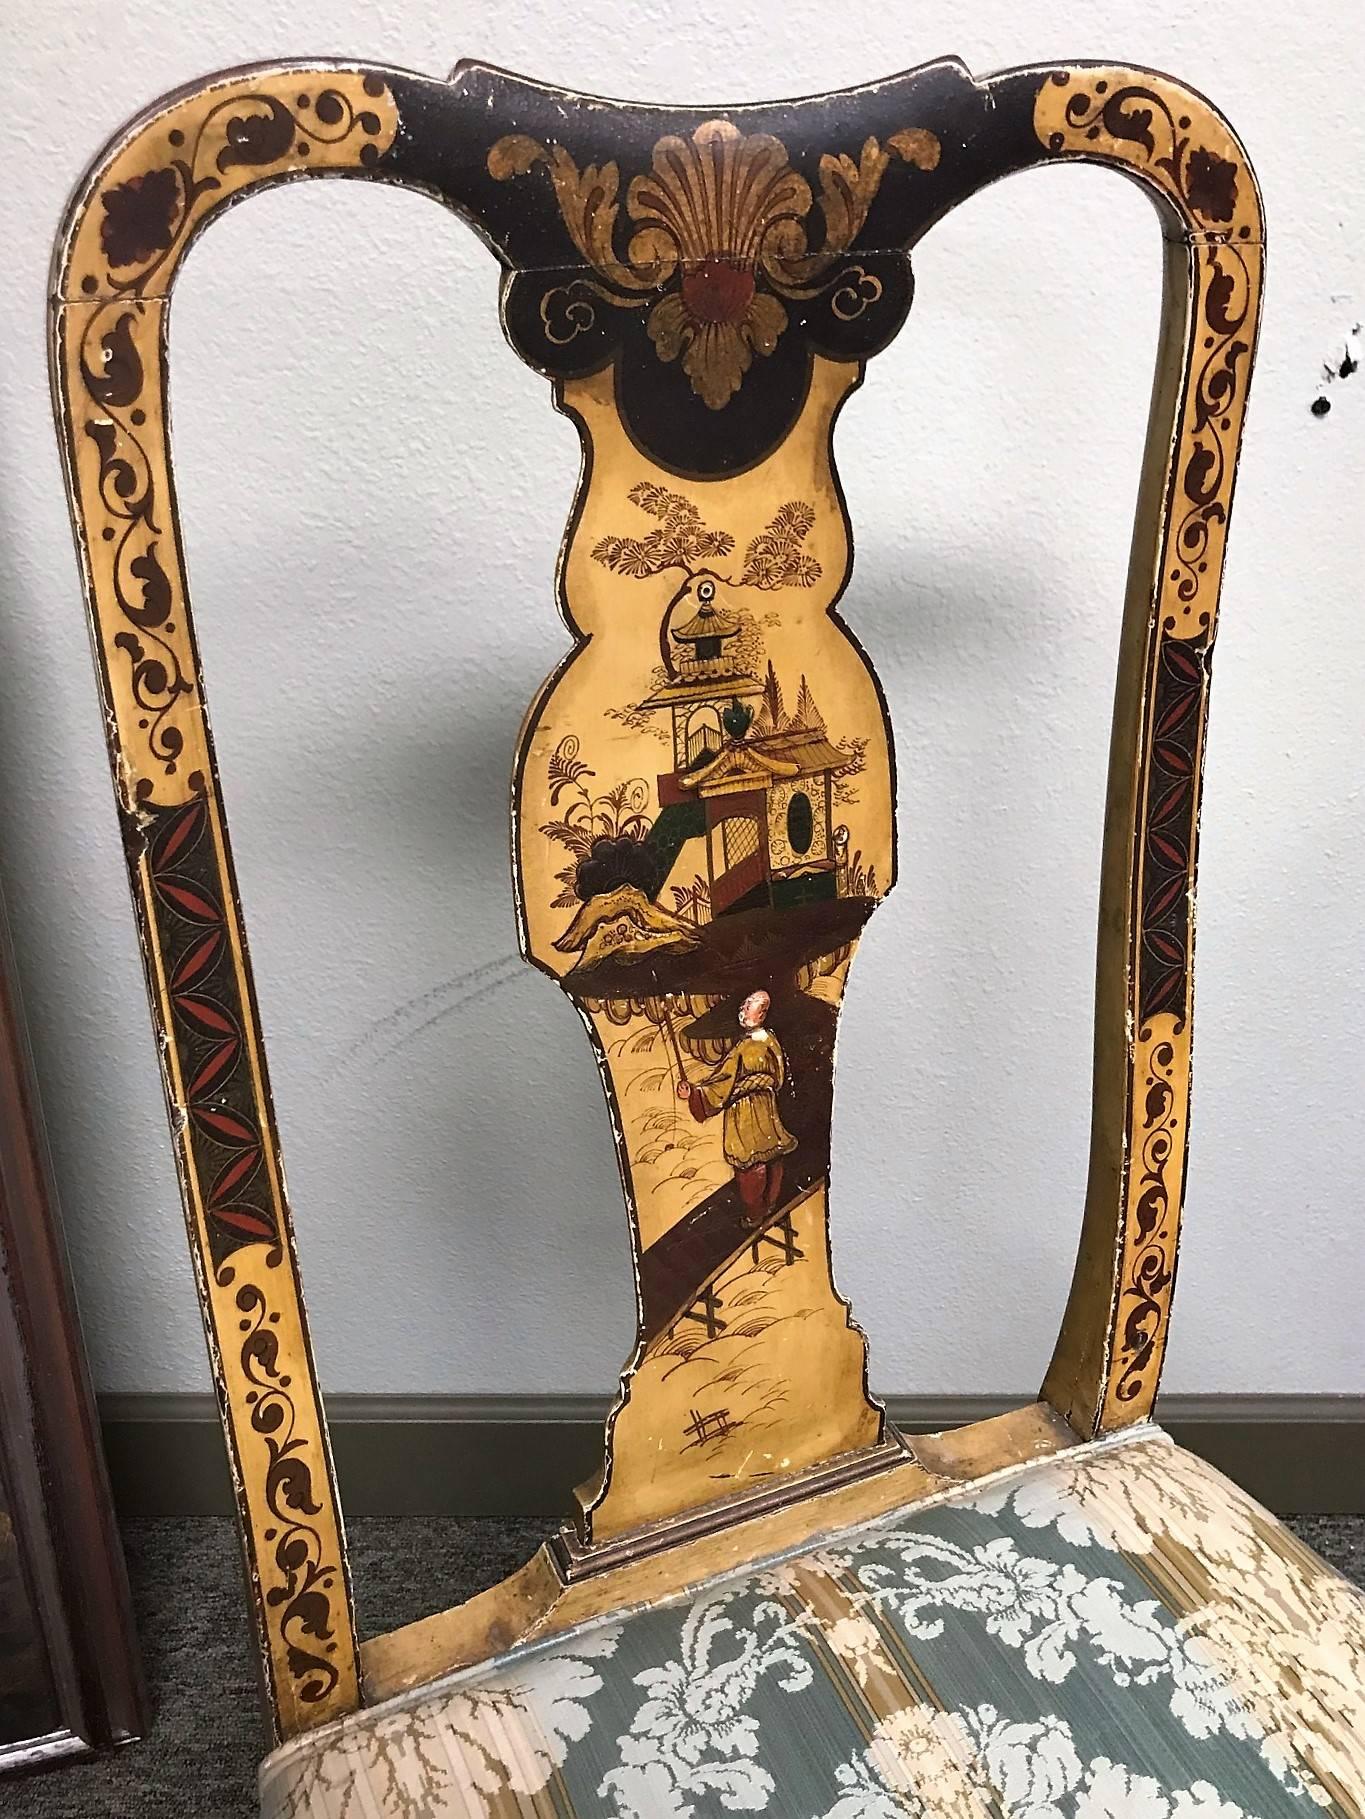 19th century English Queen Anne style side chair with silk upholstered seat and having a serpentine crest rail, shaped splat back, and cabriole front legs that terminate in a pad foot. Decorated with chinoiserie and depicting stylized leaves, an old